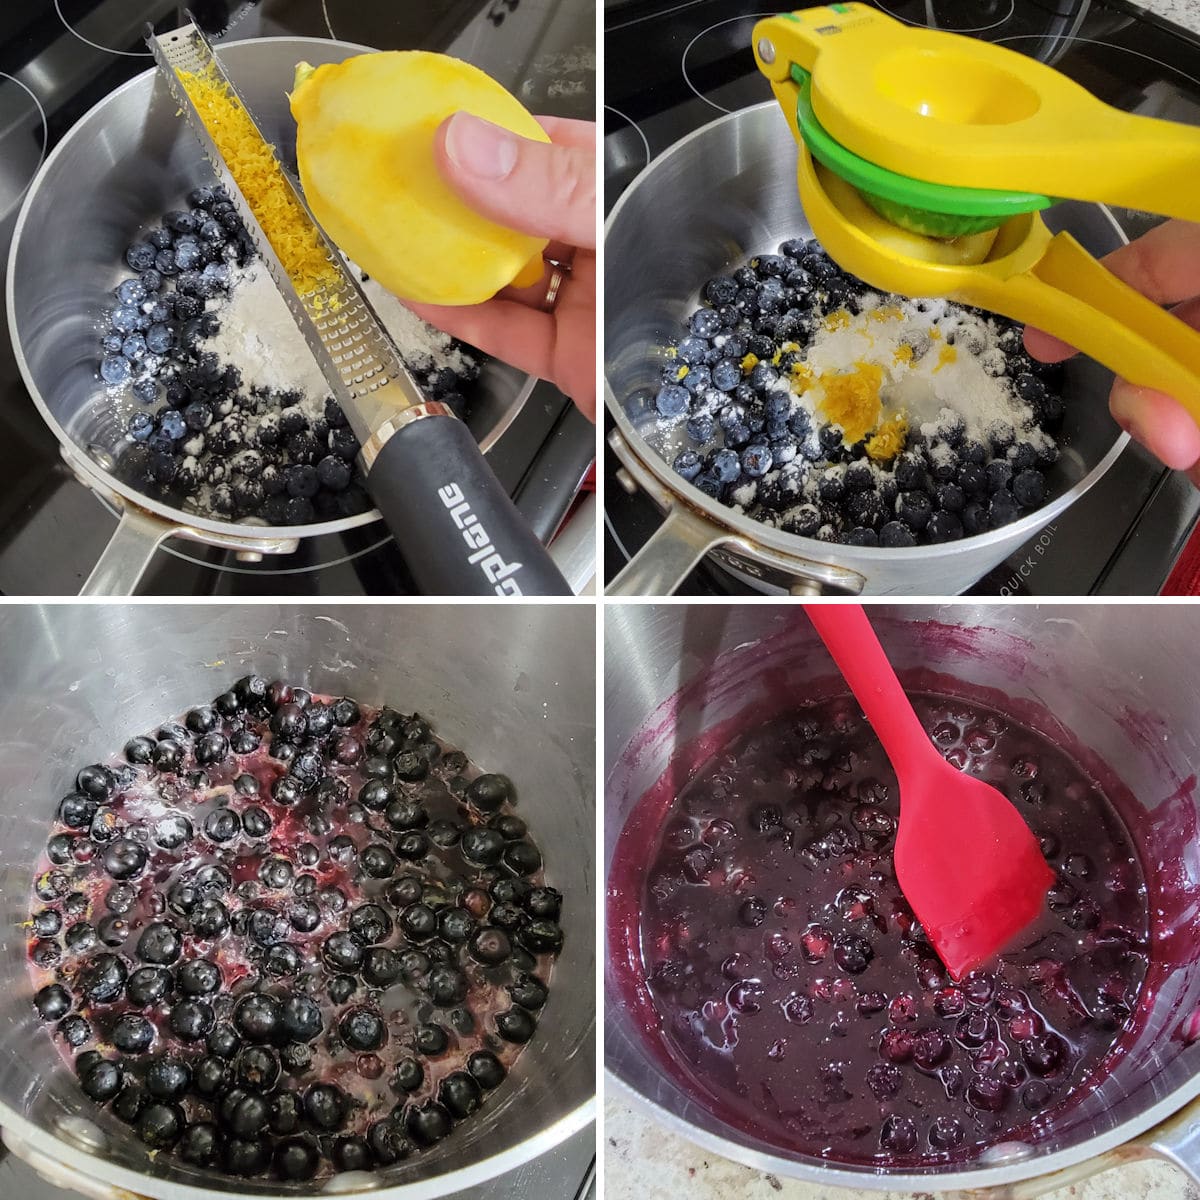 Cooking blueberry sauce in a pot on the stove top.